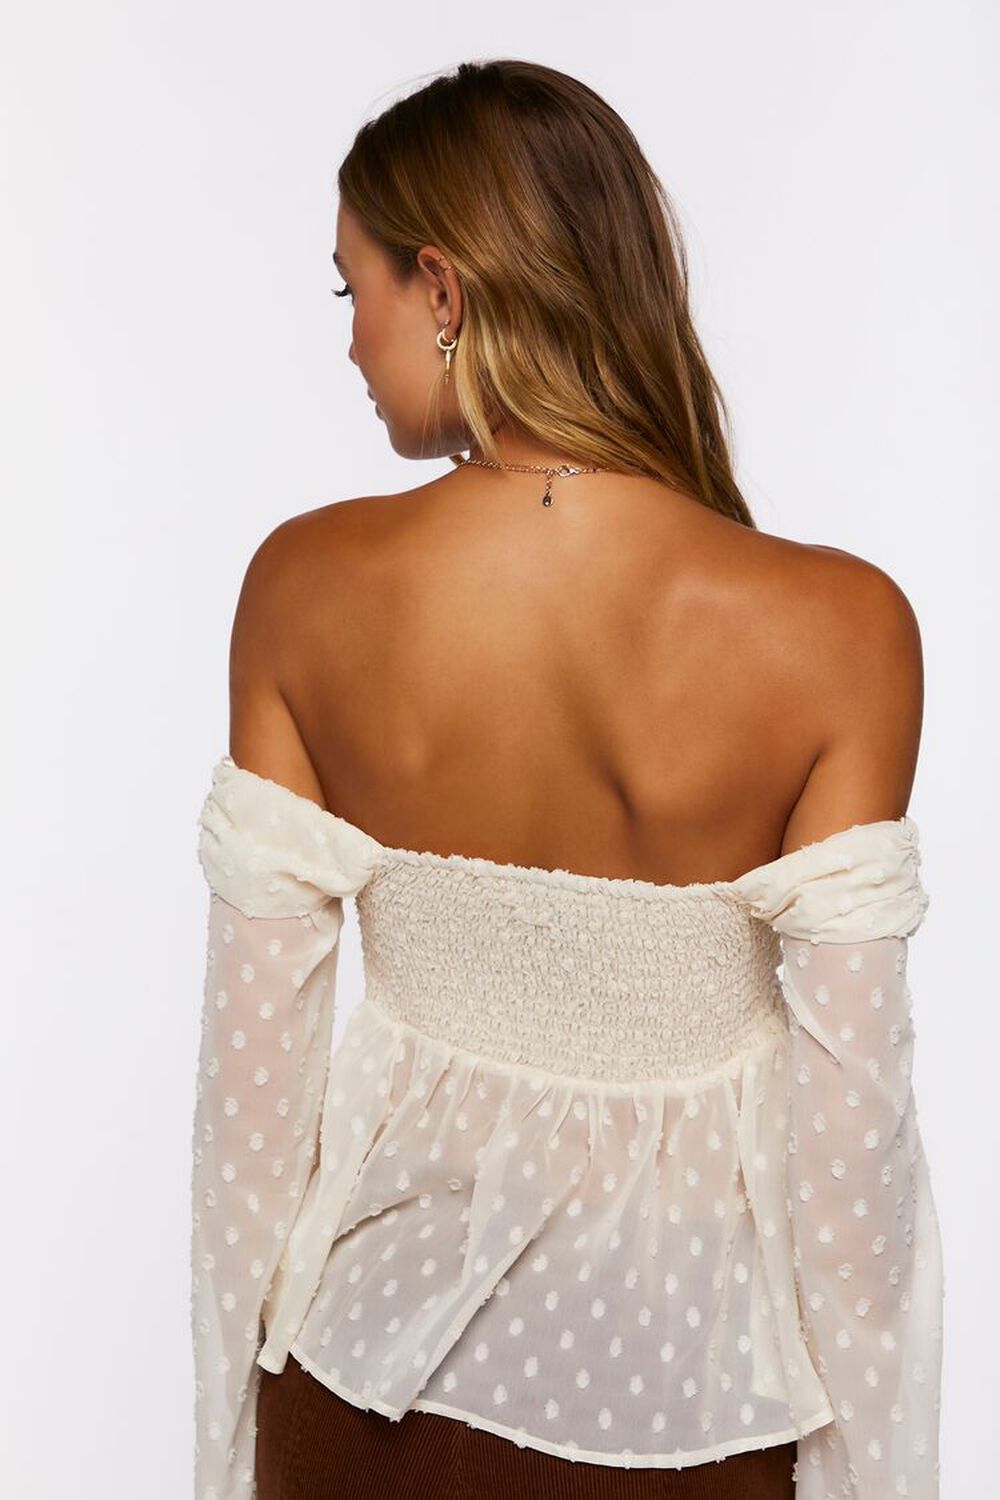 VANILLA Dotted Chiffon Off-the-Shoulder Top, image 3